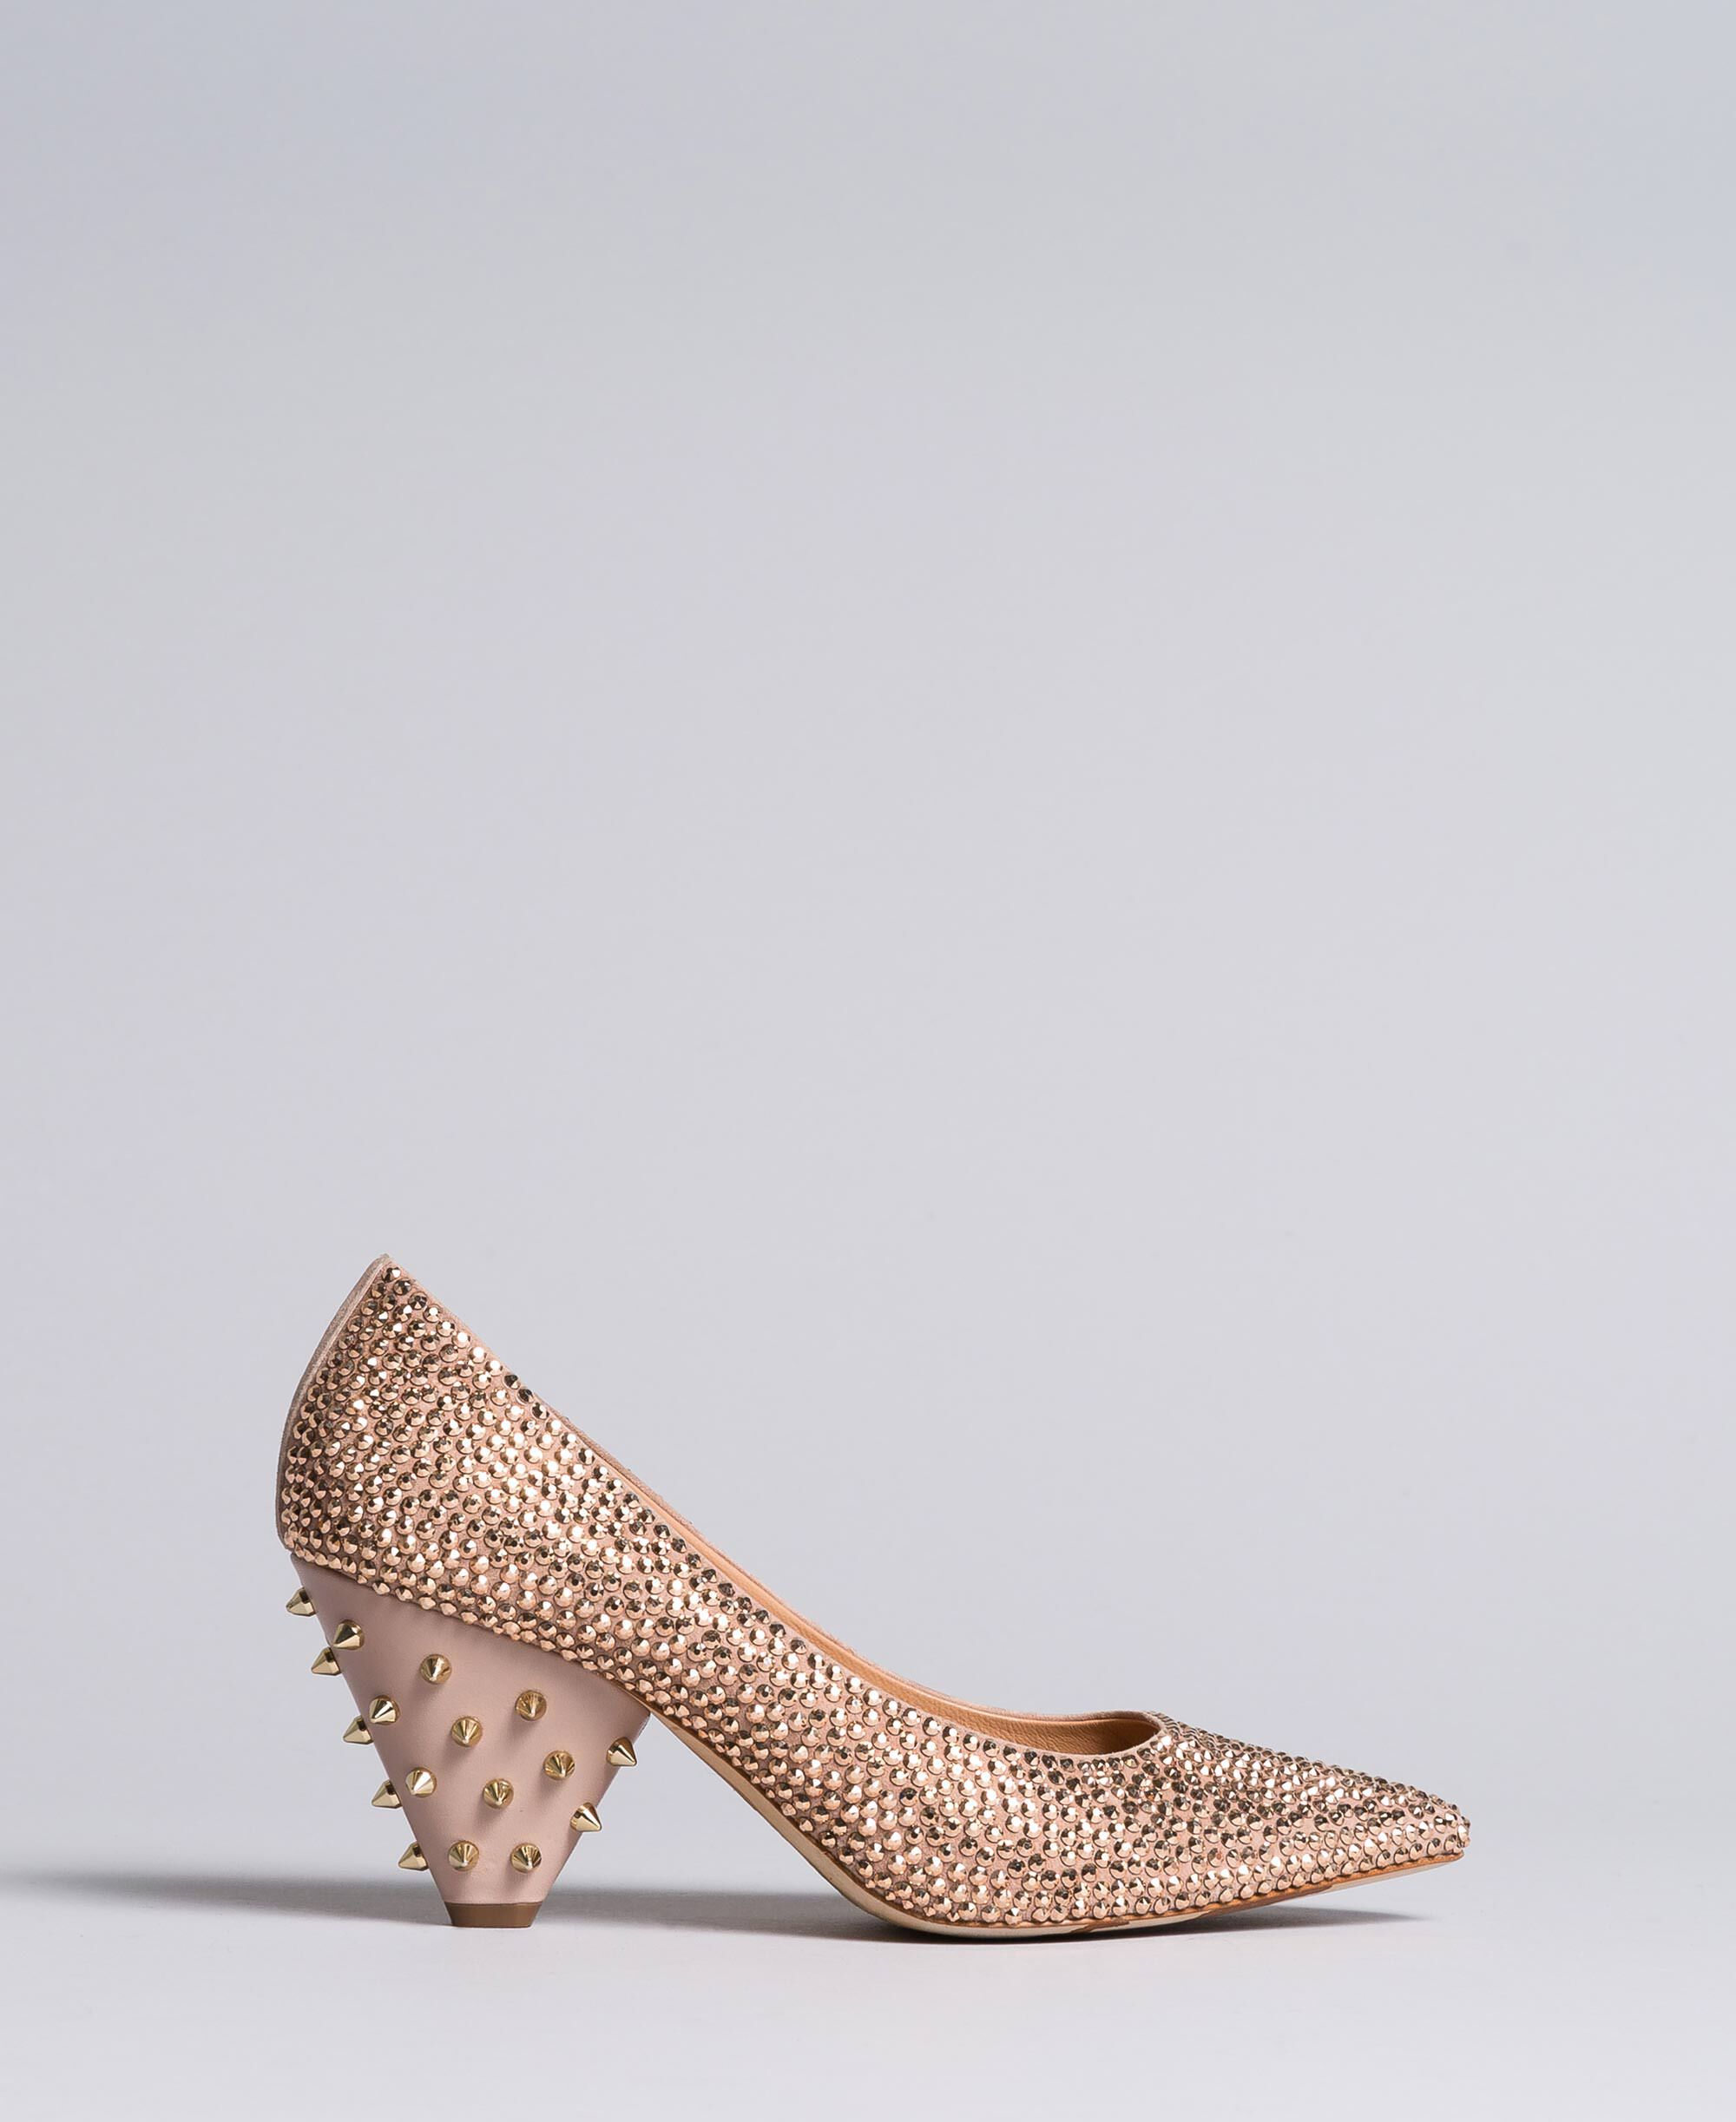 Suede rhinestone-clad court shoes